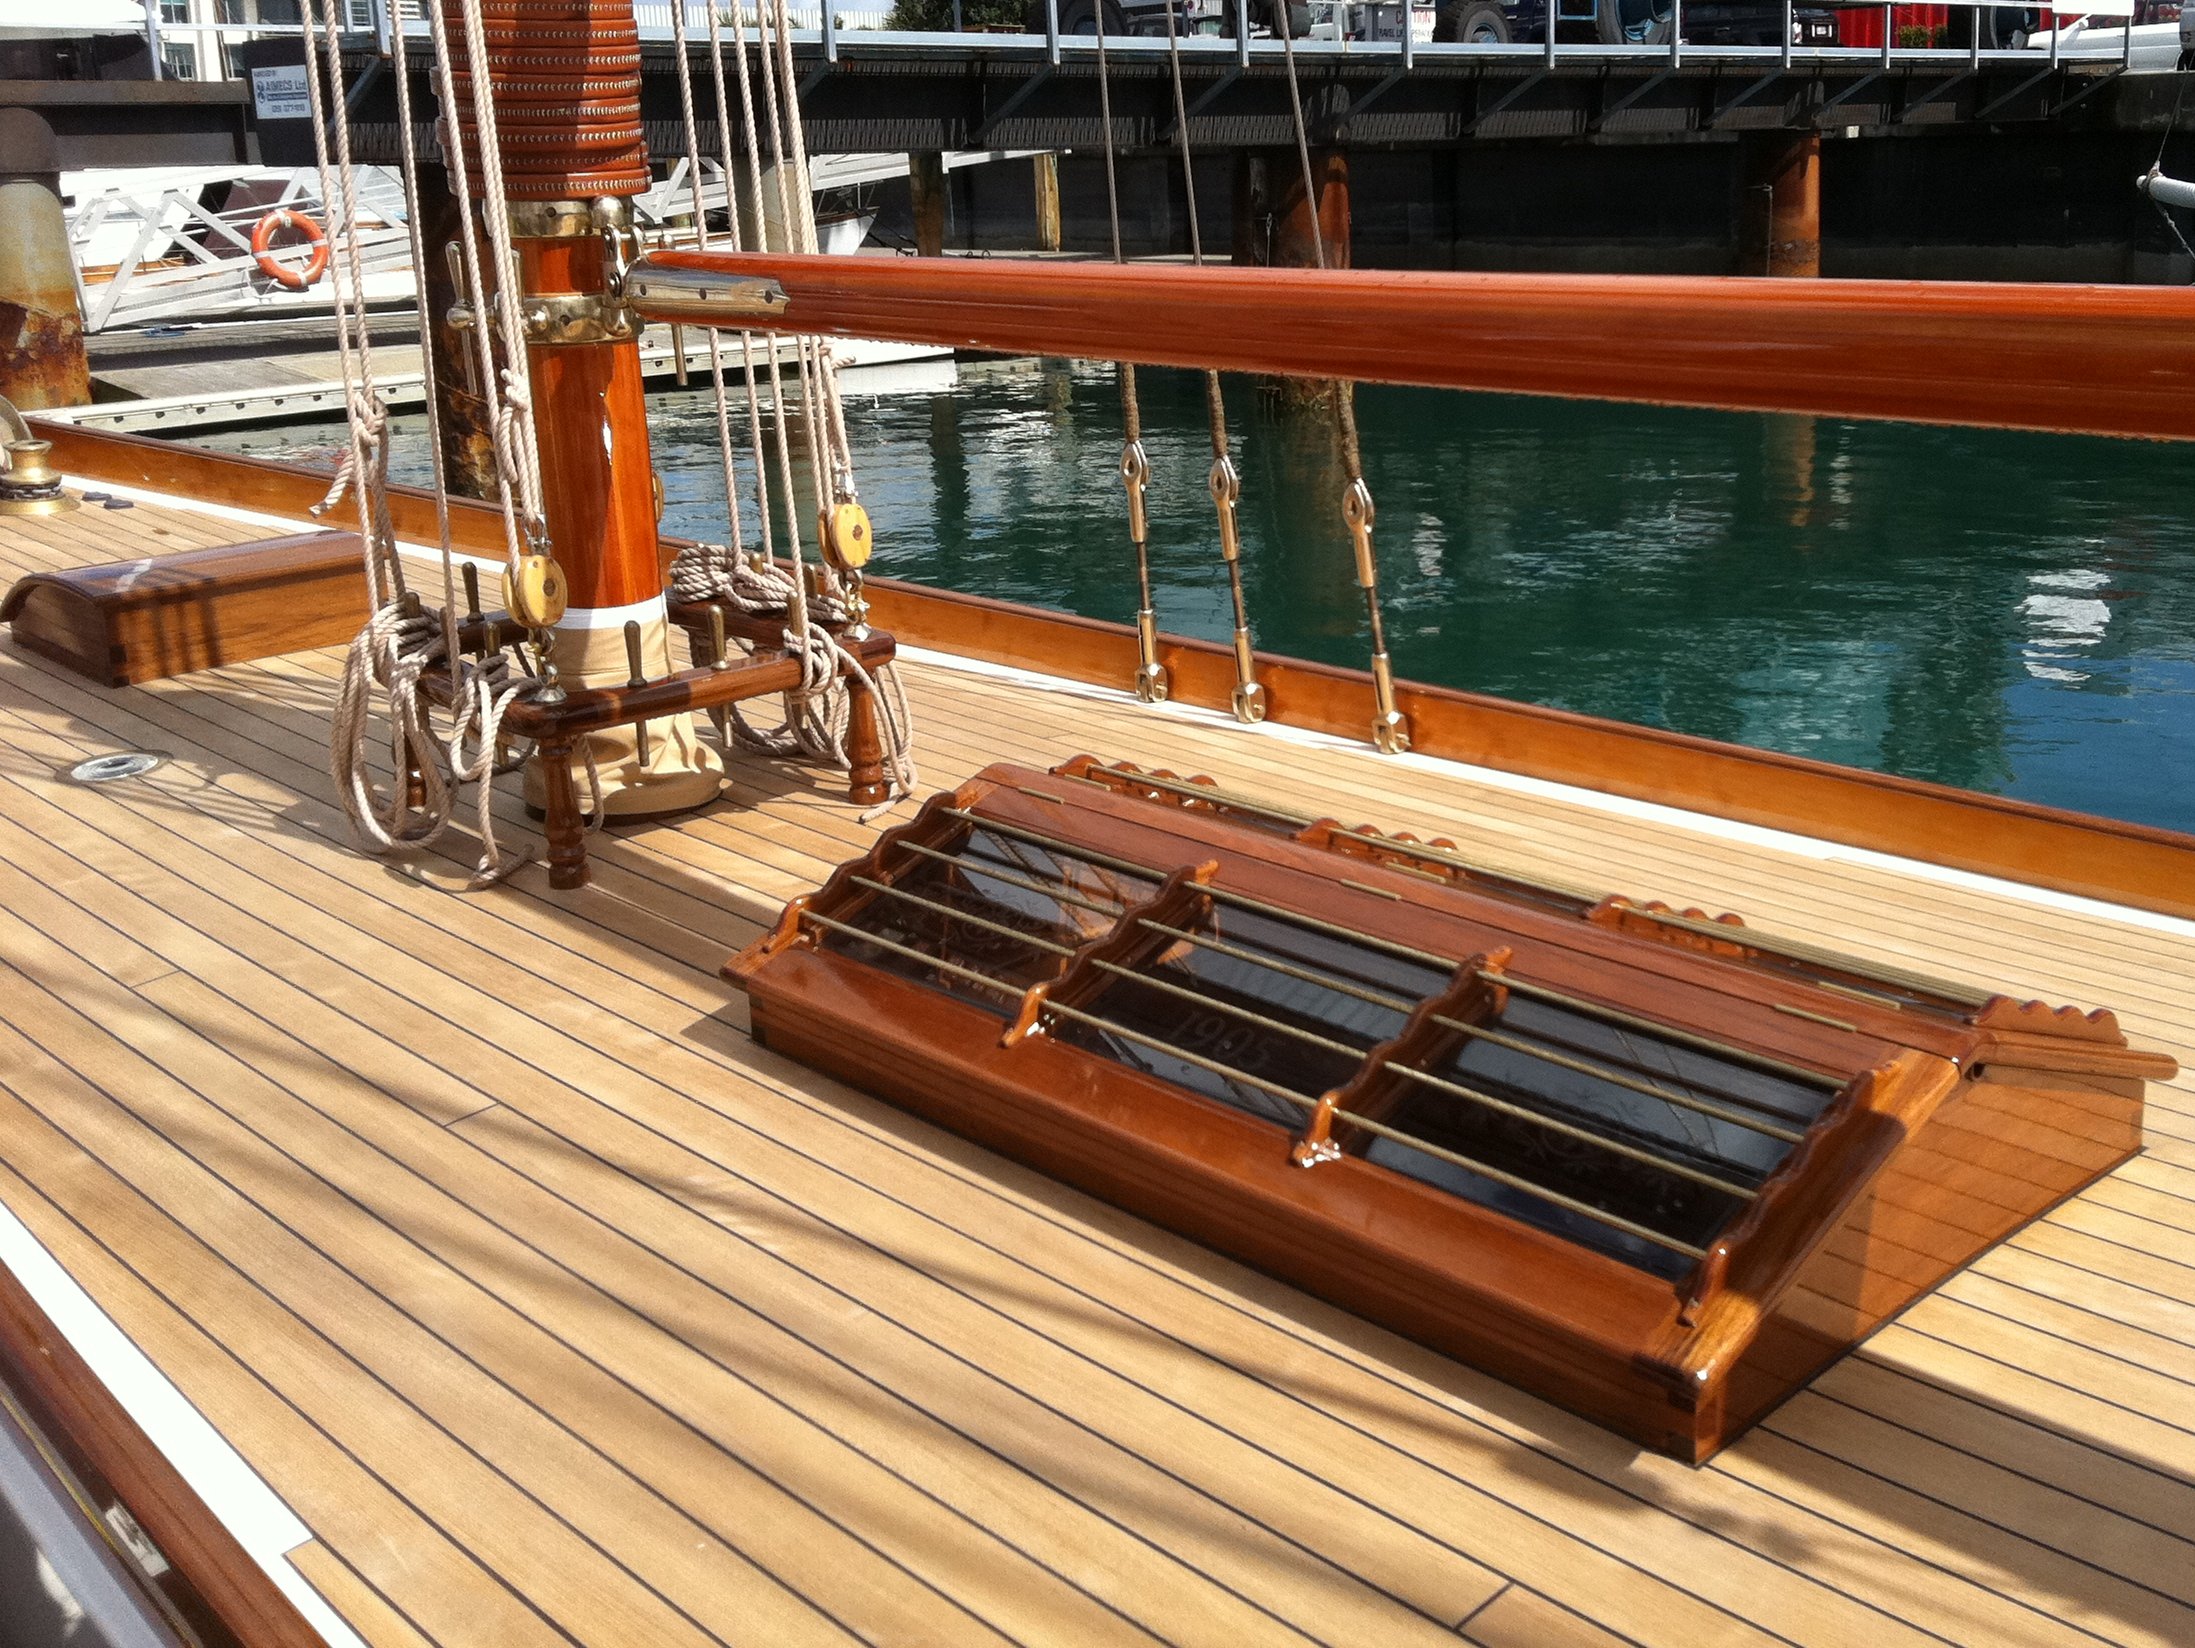 Should You Buy A Wooden Sailboat To Go Cruising? – LIFE AS ...